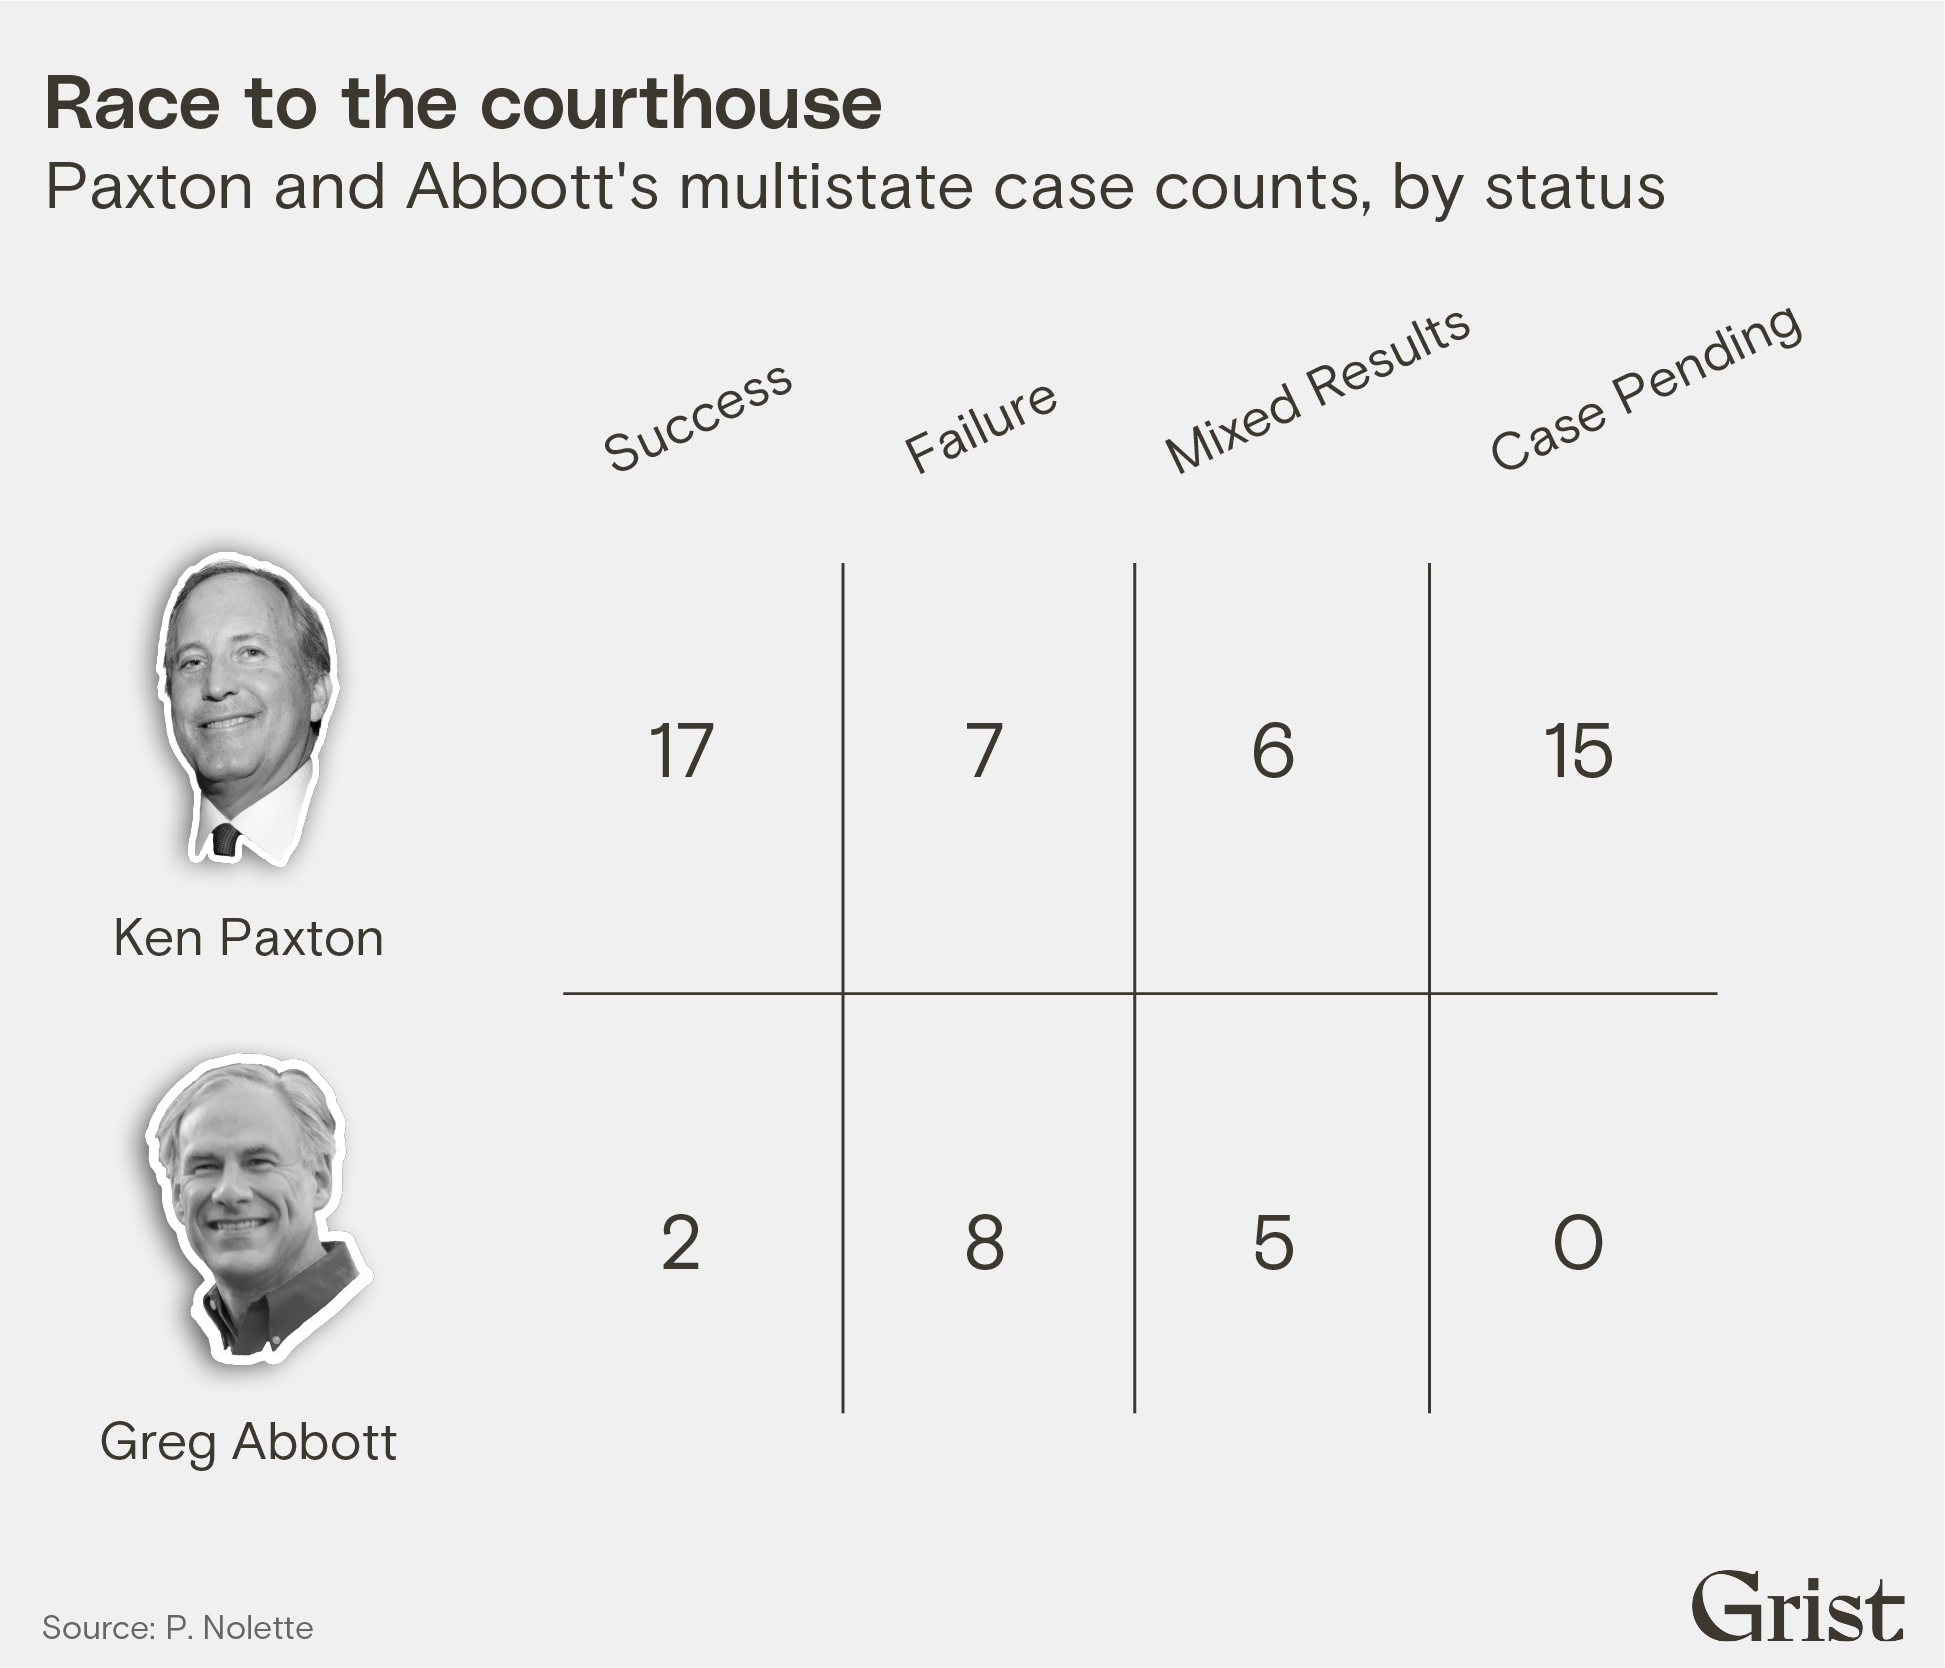 A table showing Ken Paxton and Greg Abbott's multistate case counts, by status. Paxton has brought 17 successful multistate cases (with 15 more pending), while Abbott brought 2 successful cases.